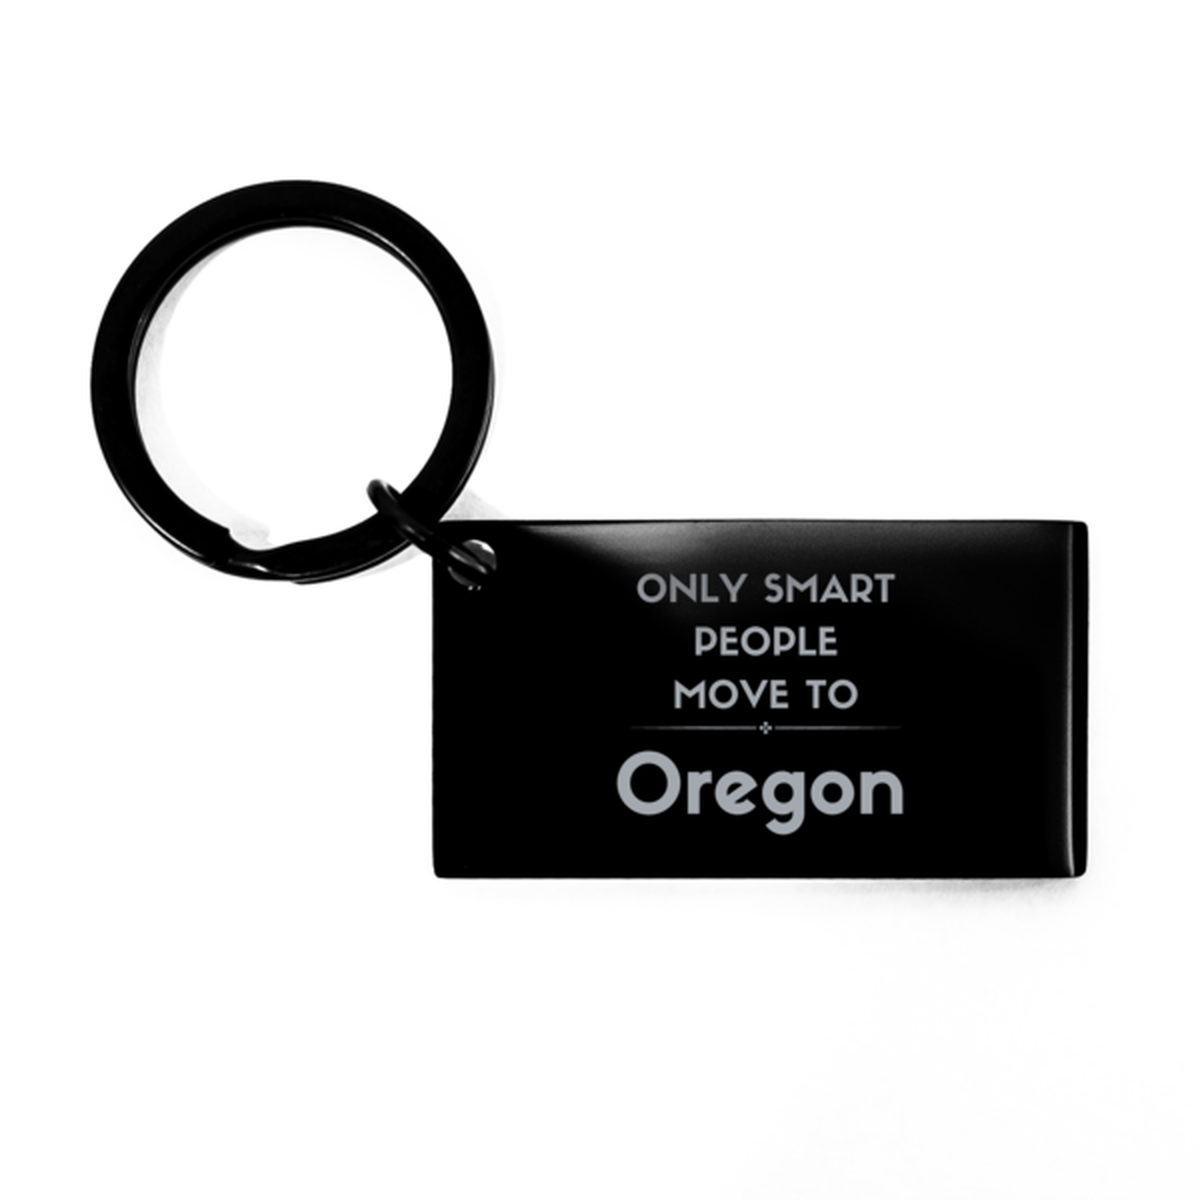 Only smart people move to Oregon Keychain, Gag Gifts For Oregon, Move to Oregon Gifts for Friends Coworker Funny Saying Quote